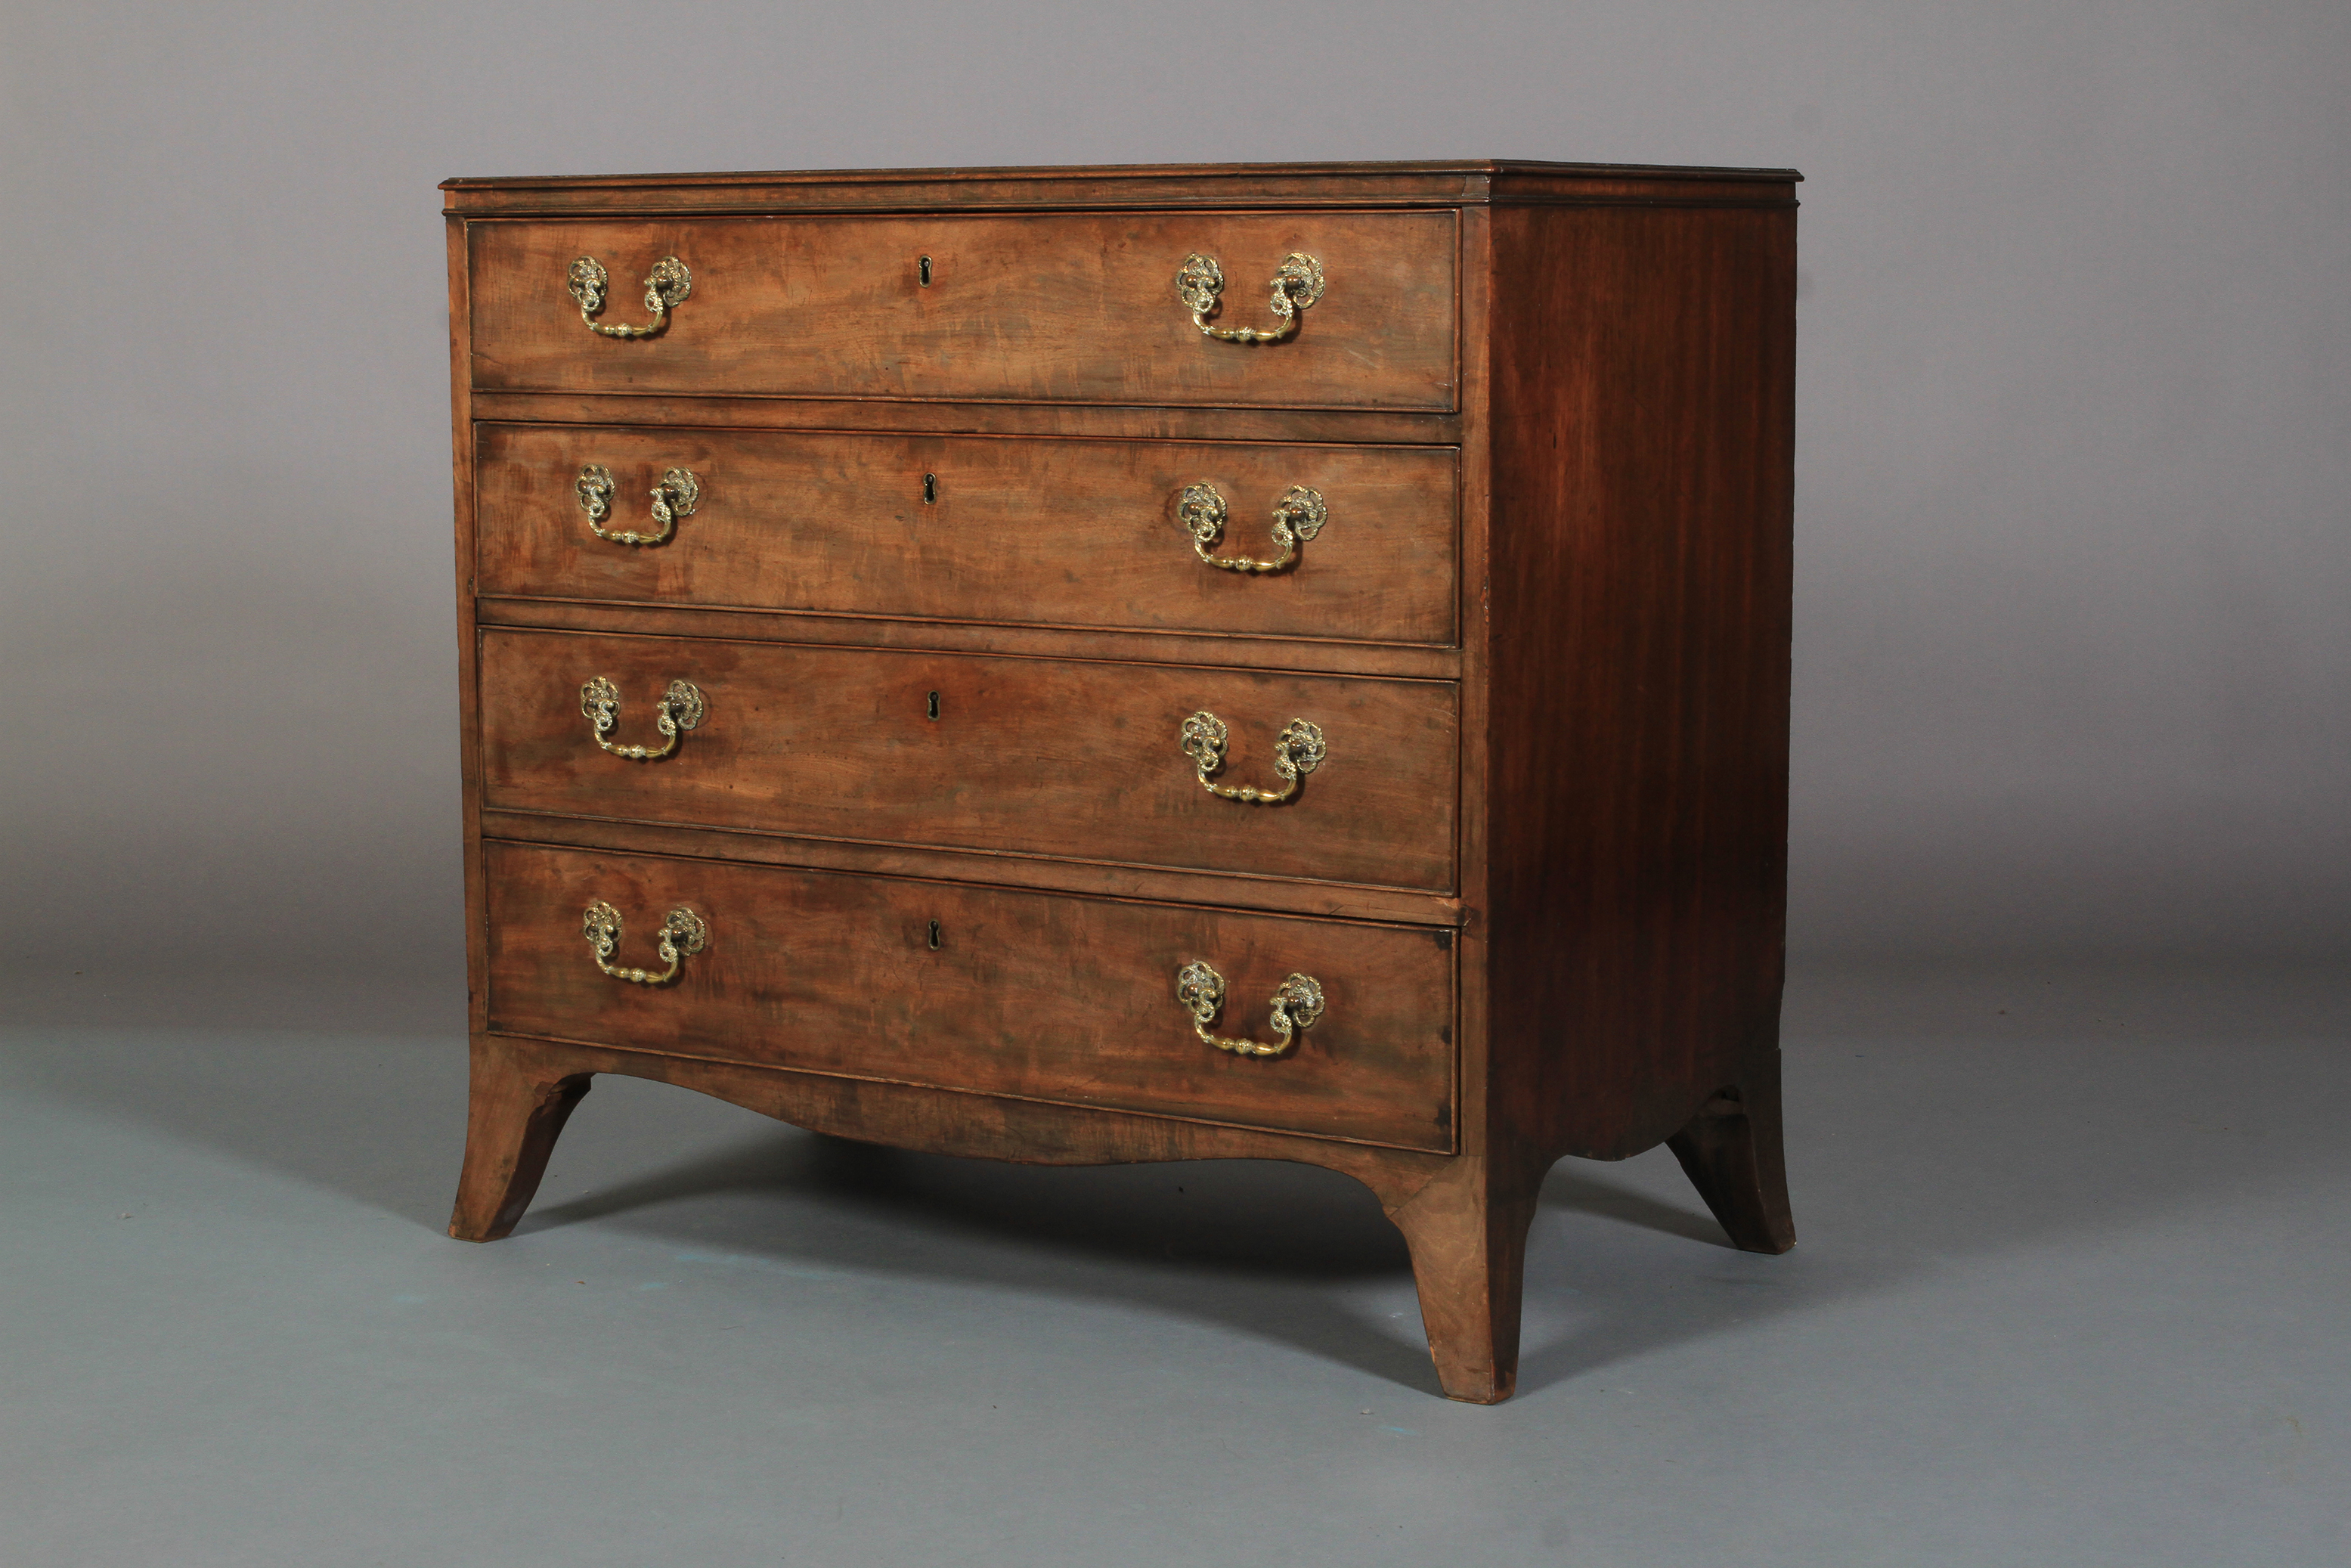 AN EARLY 19TH CENTURY MAHOGANY DRESSING CHEST of four drawers, fitted with a baise lined brushing